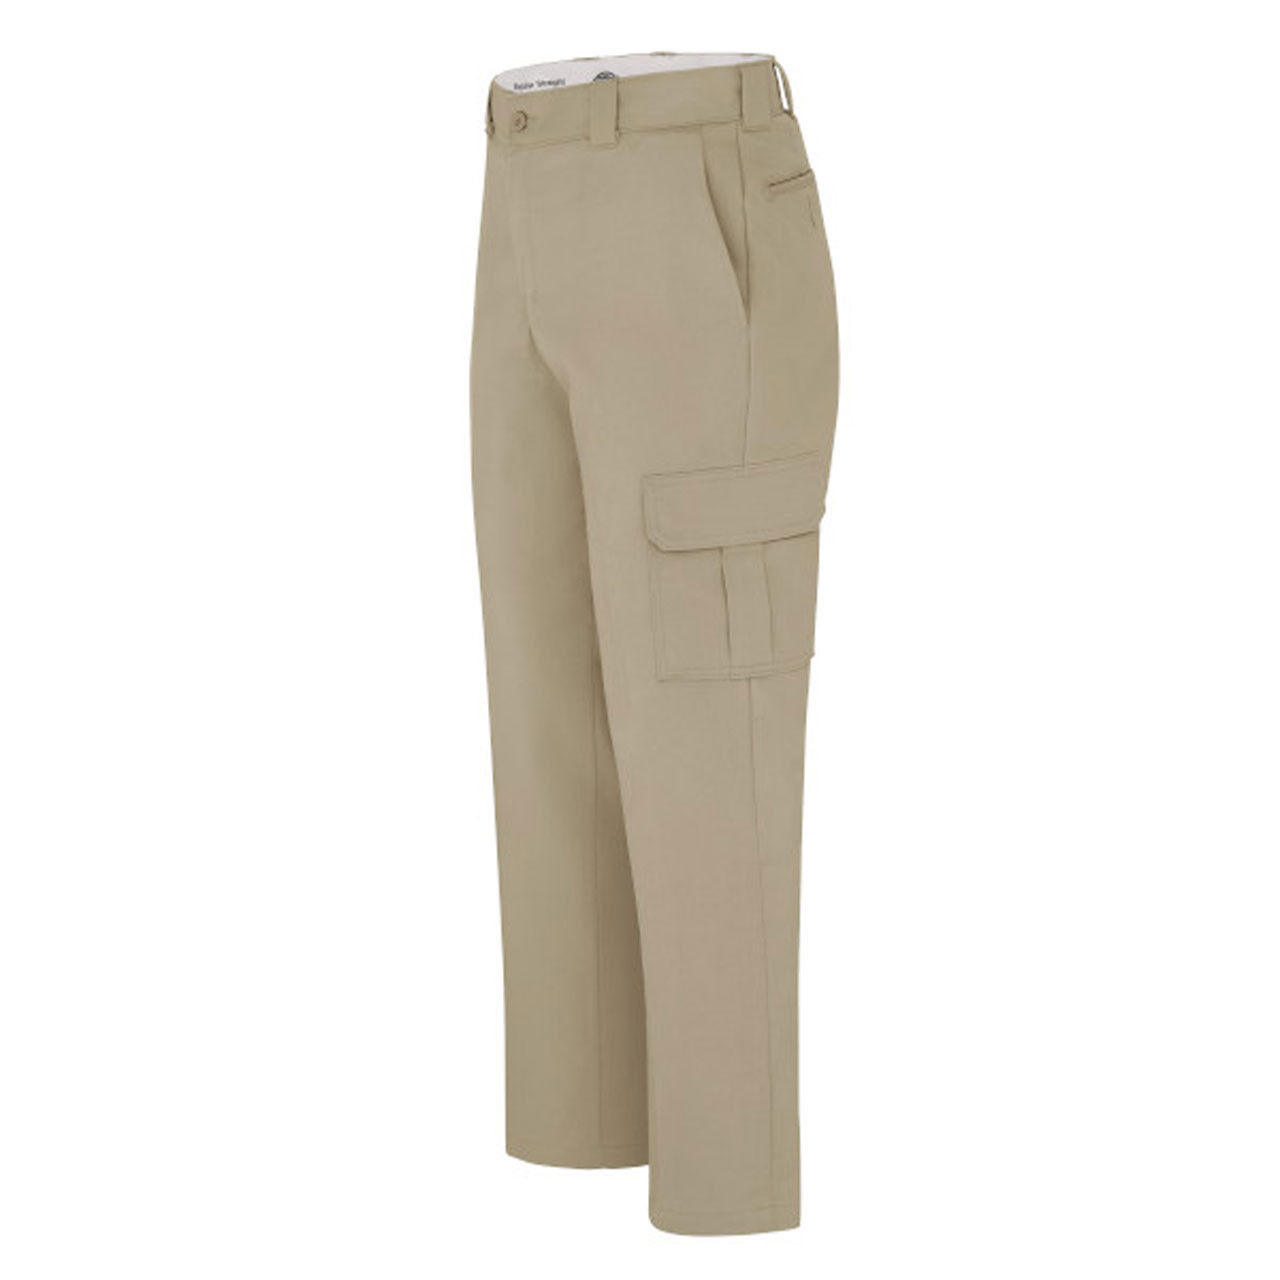 Does the Dickies® Men's Cargo Pant wp95 have any special features?